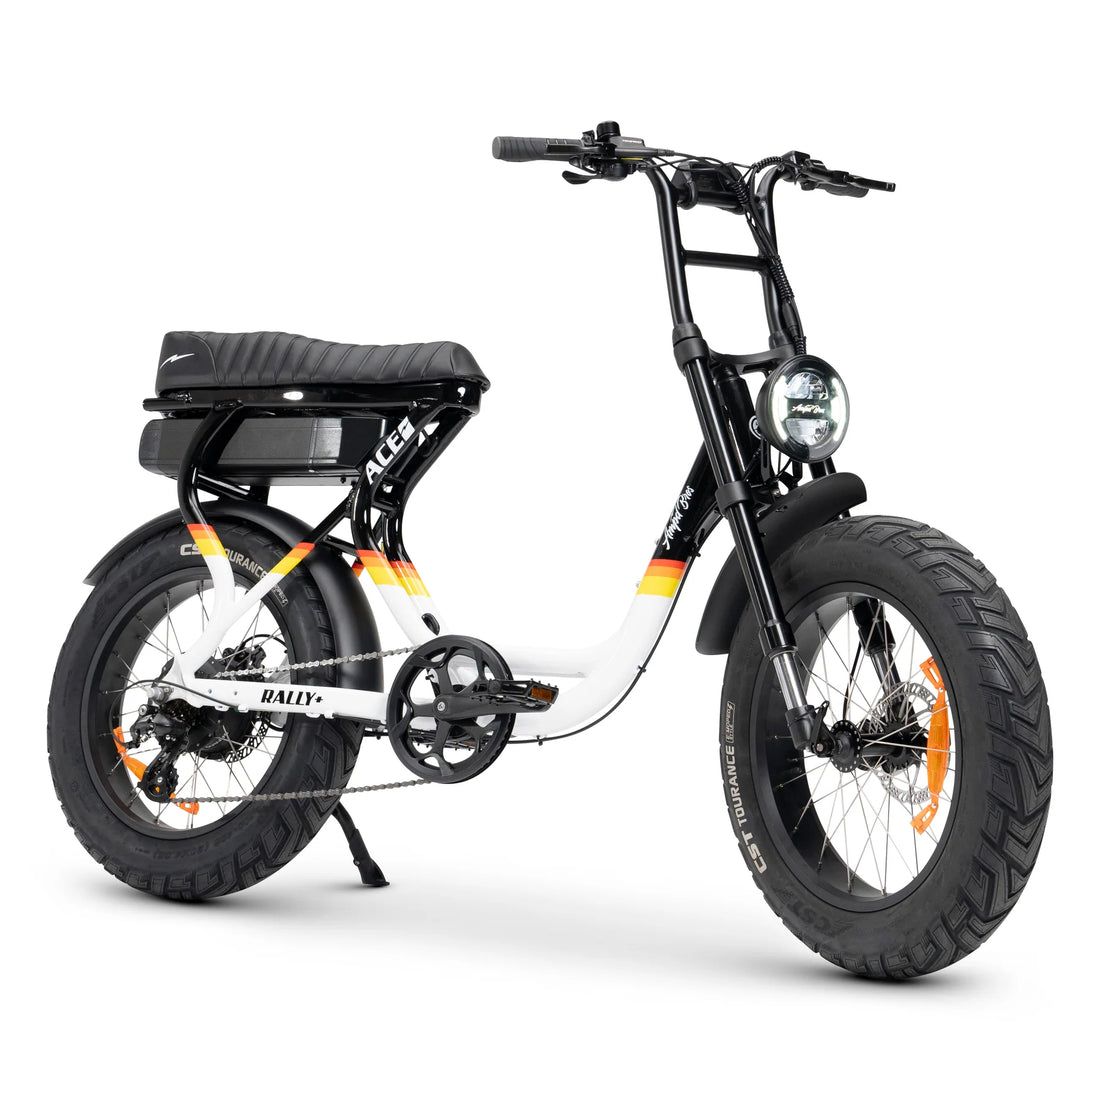 Ampd Bros ACE Rally + Edition Electric Bike